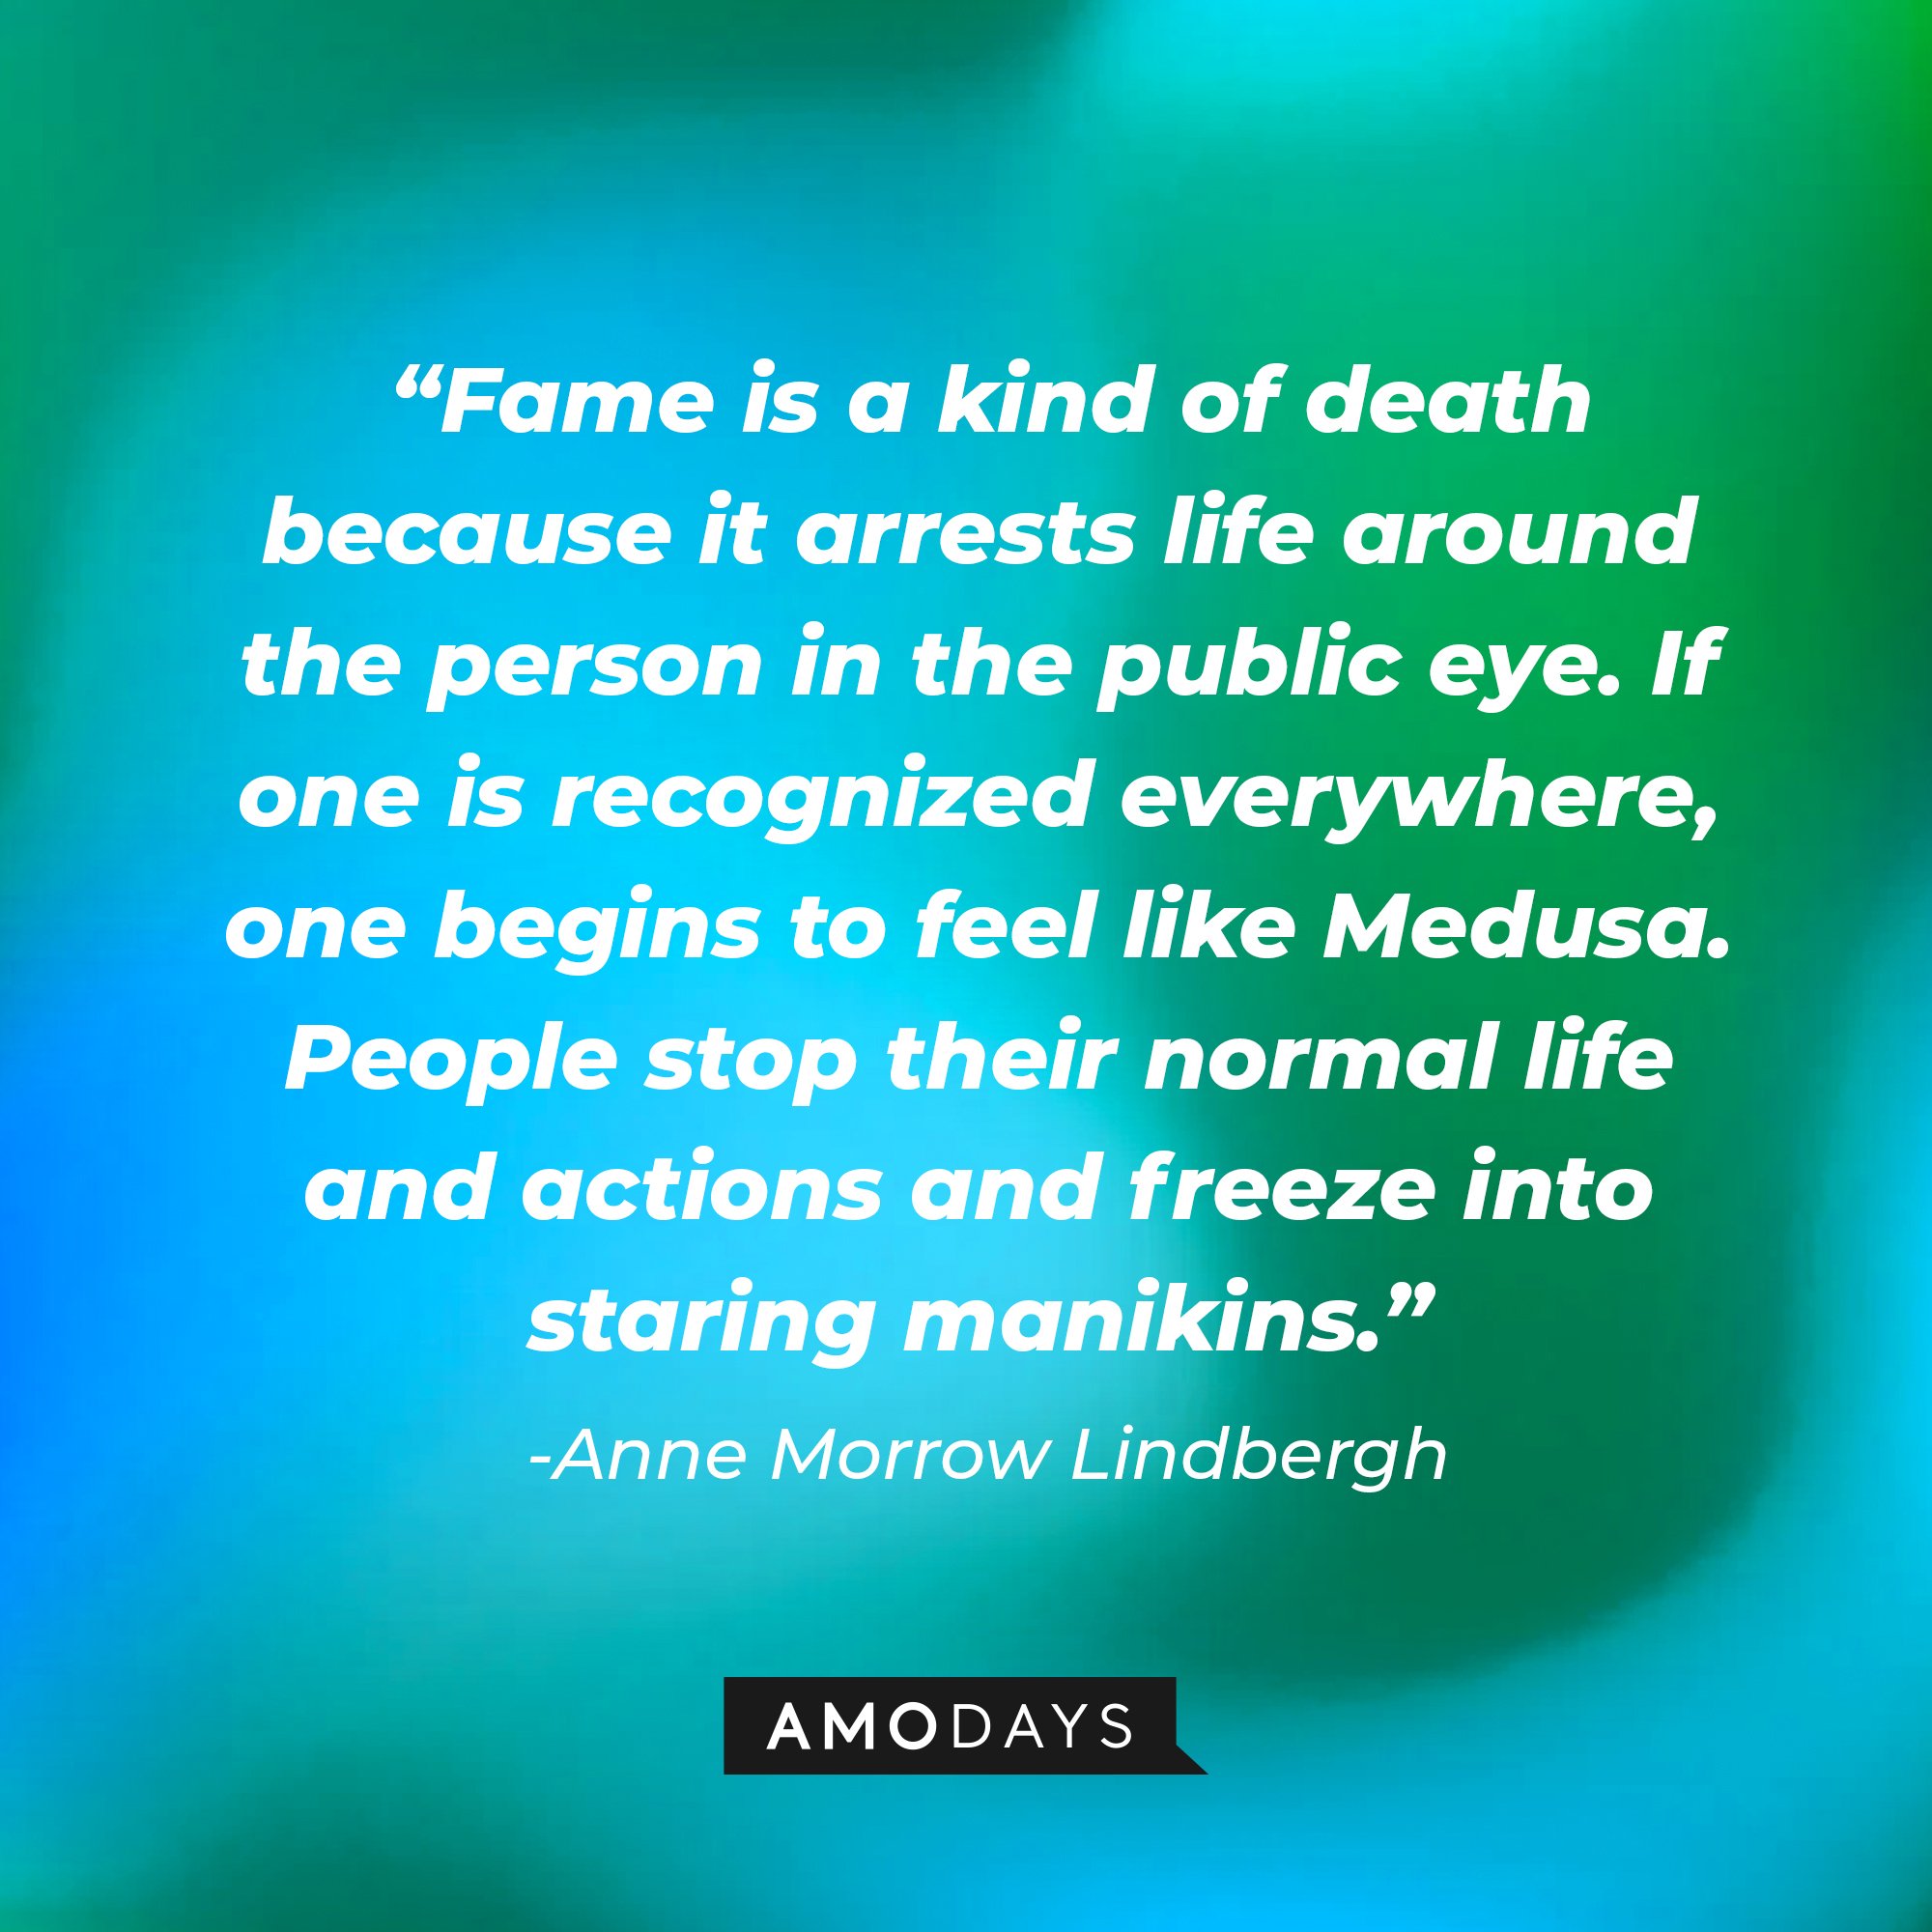 Anne Morrow Lindbergh’s quote: “Fame is a kind of death because it arrests life around the person in the public eye. If one is recognized everywhere, one begins to feel like Medusa. People stop their normal life and actions and freeze into staring manikins.” | Image: AmoDays